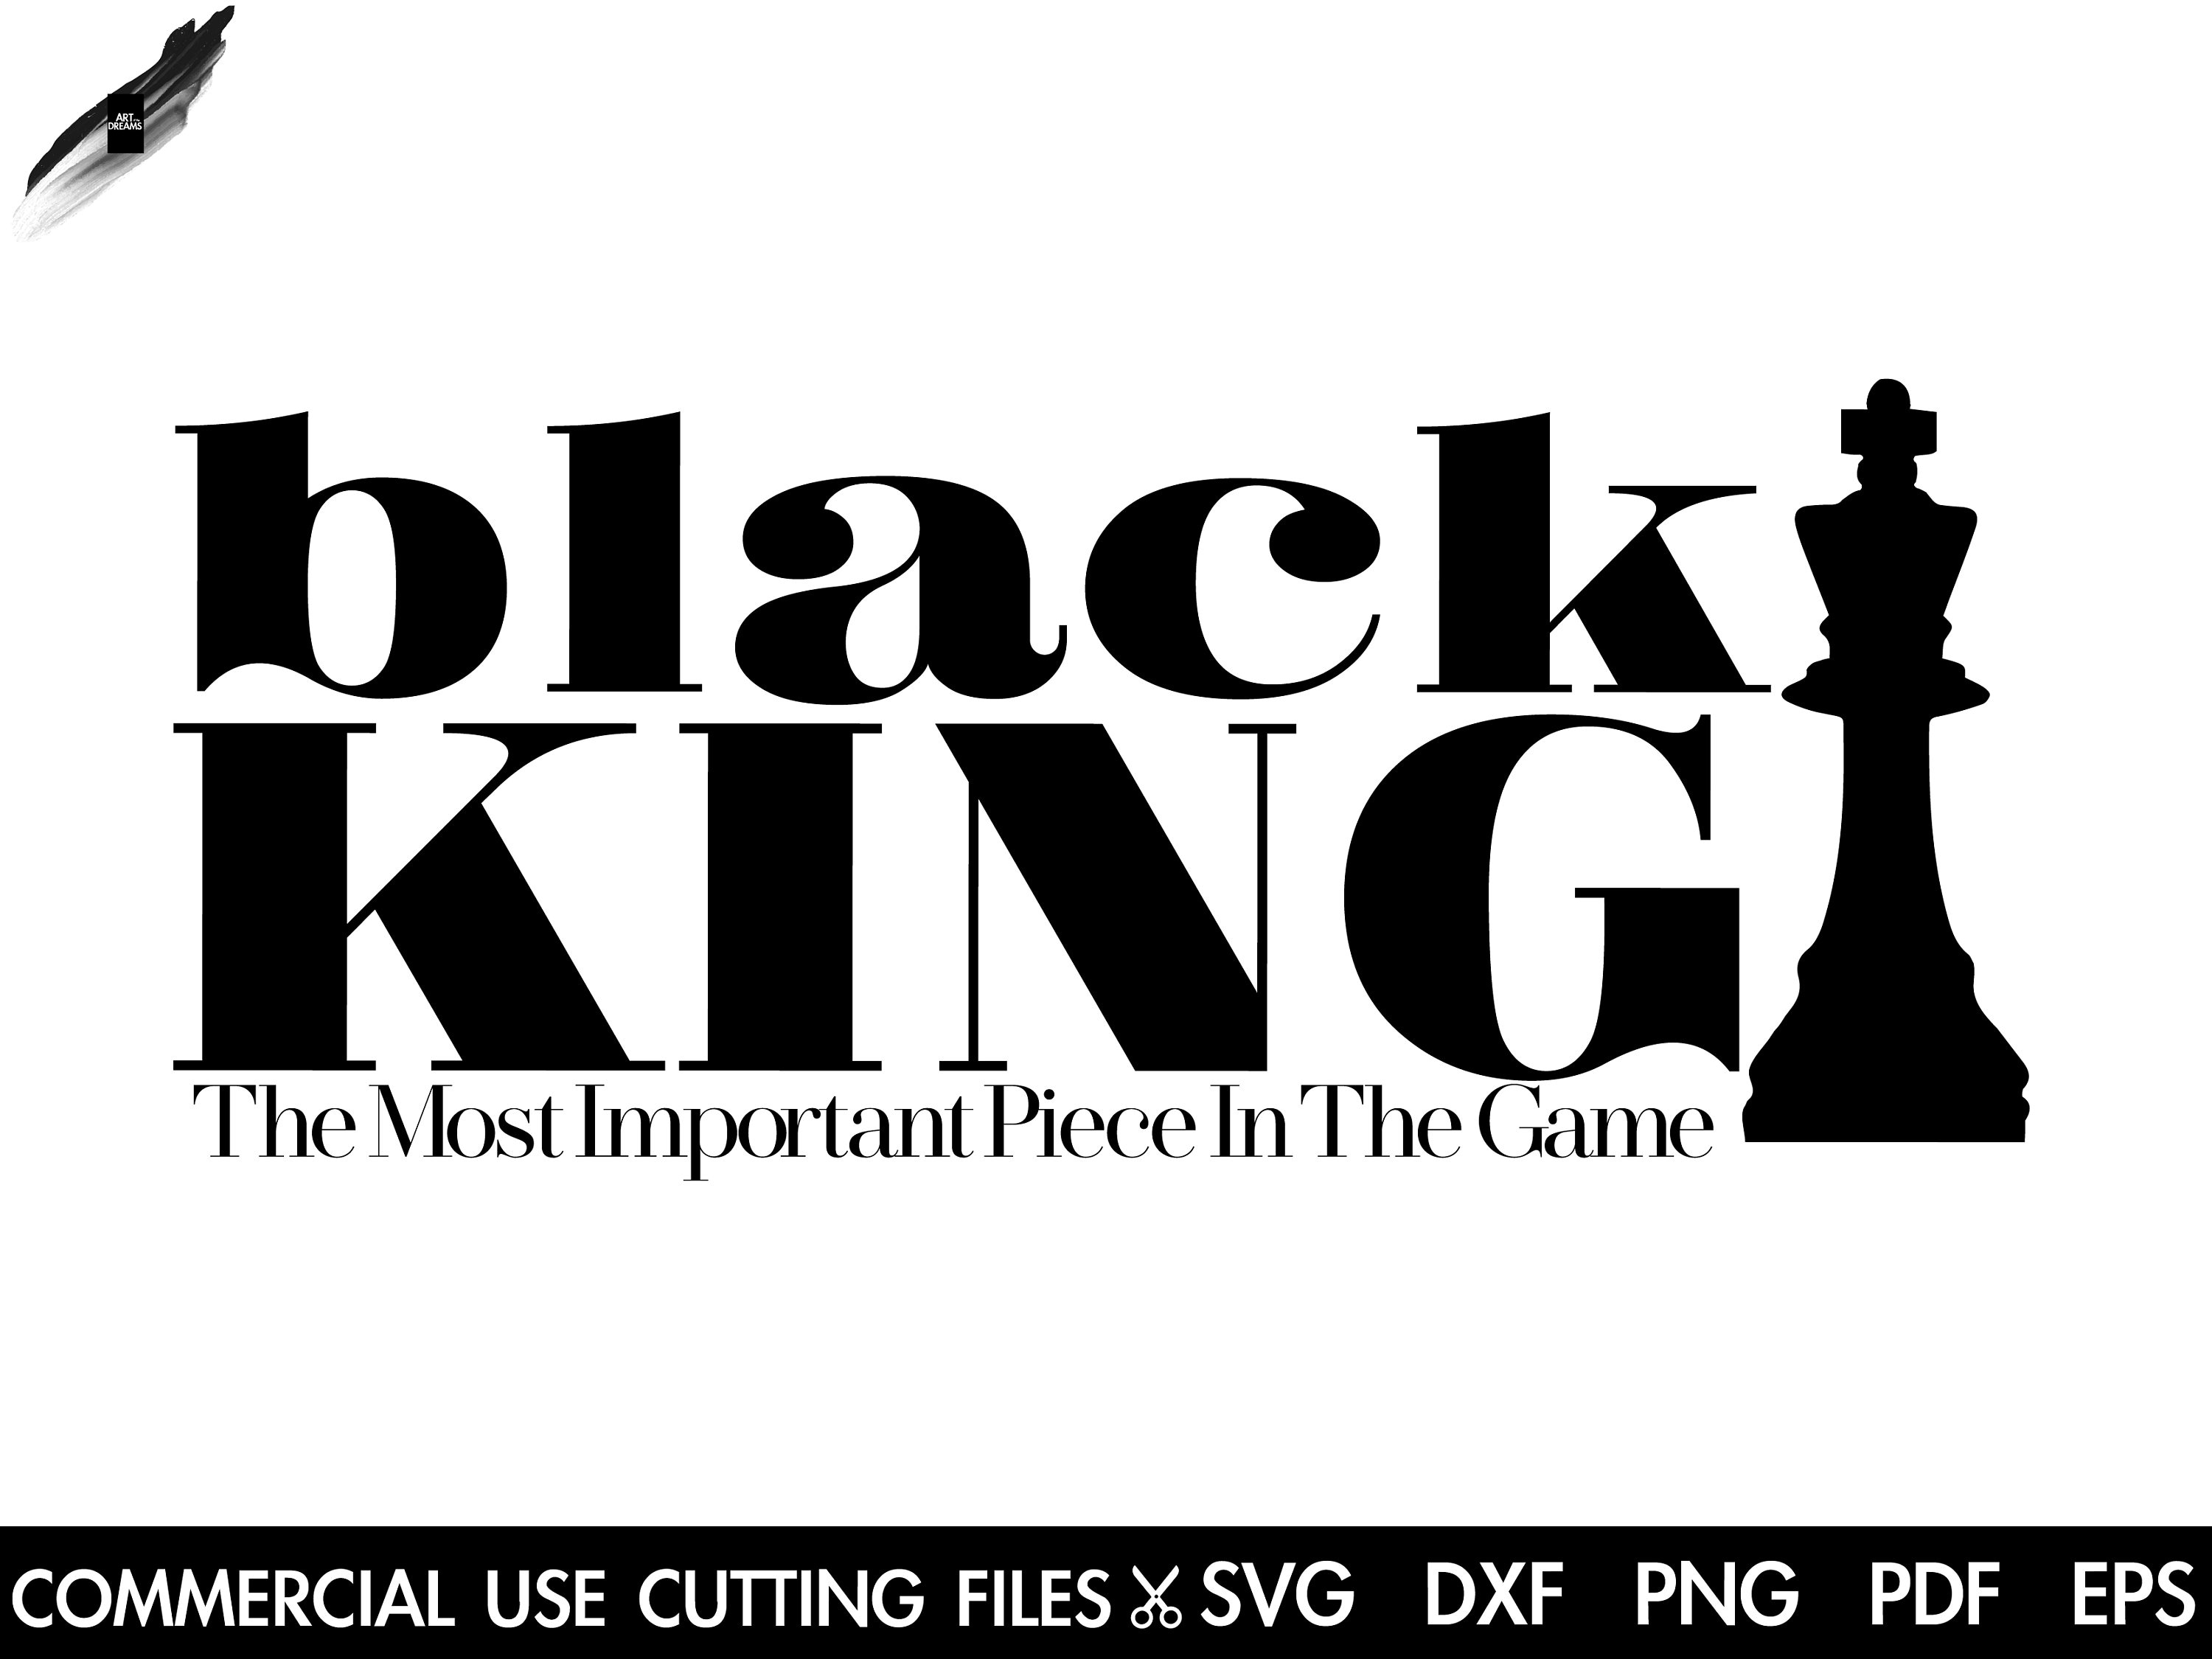 Black King The Most Powerful Piece in the game Chess African American